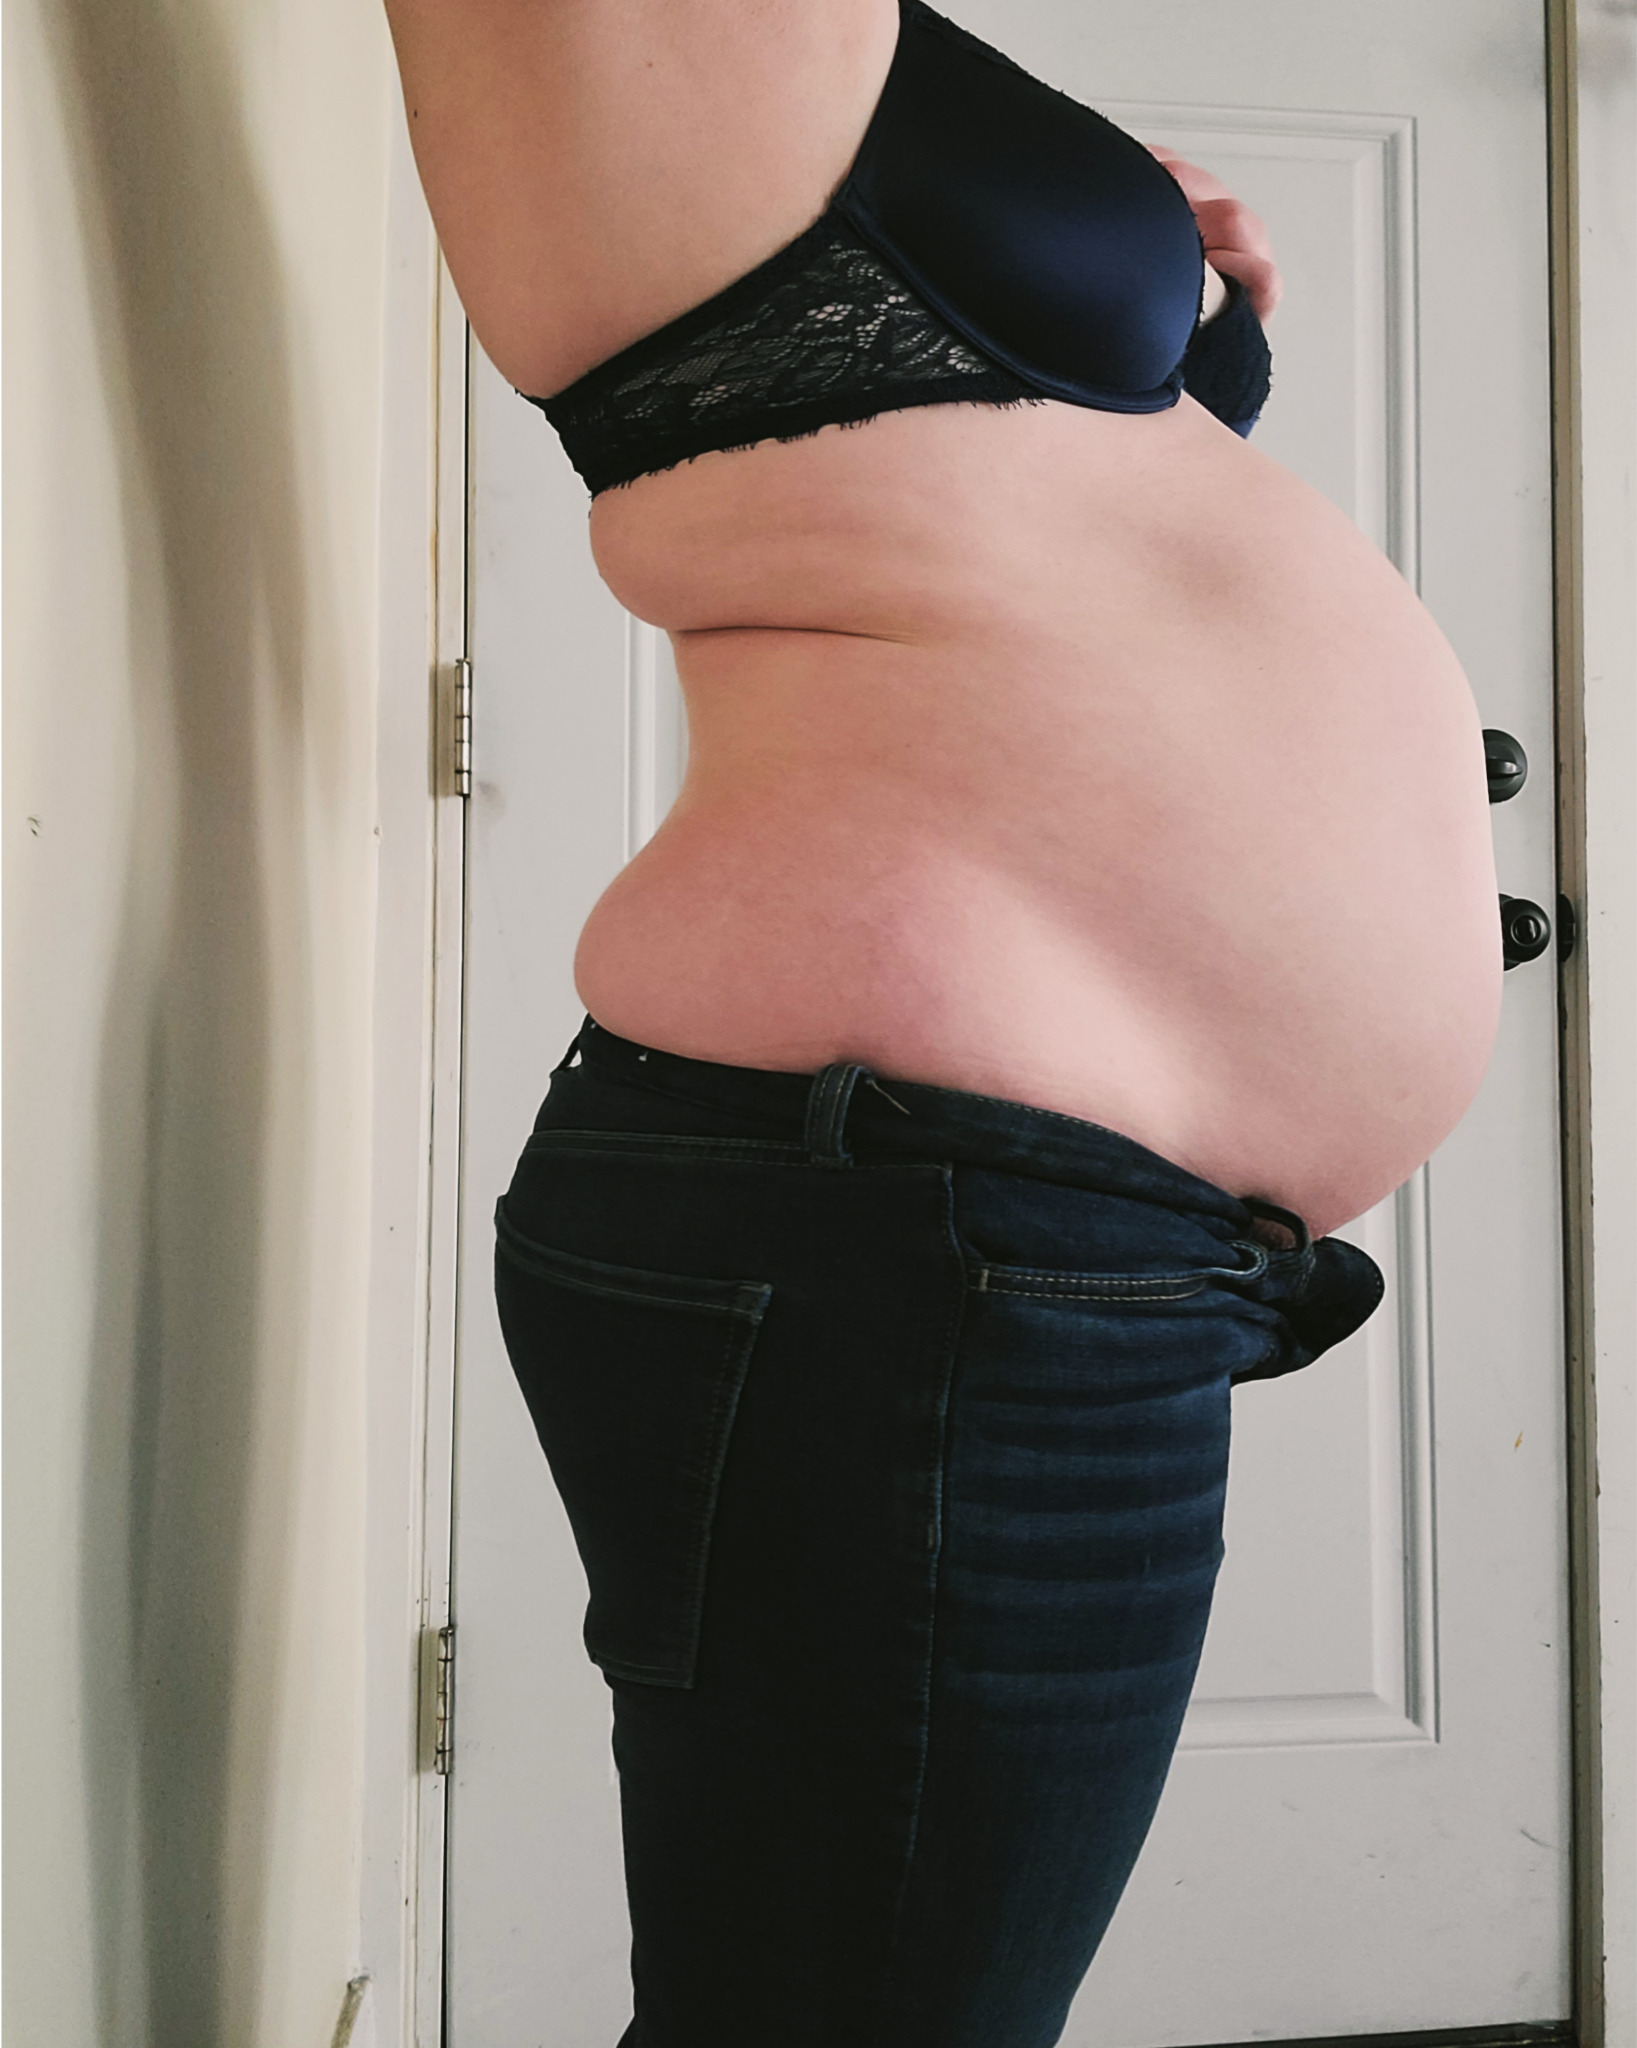 Sex kendallhalobelly:Big lunch for a chonky gurlll*Teasing pictures